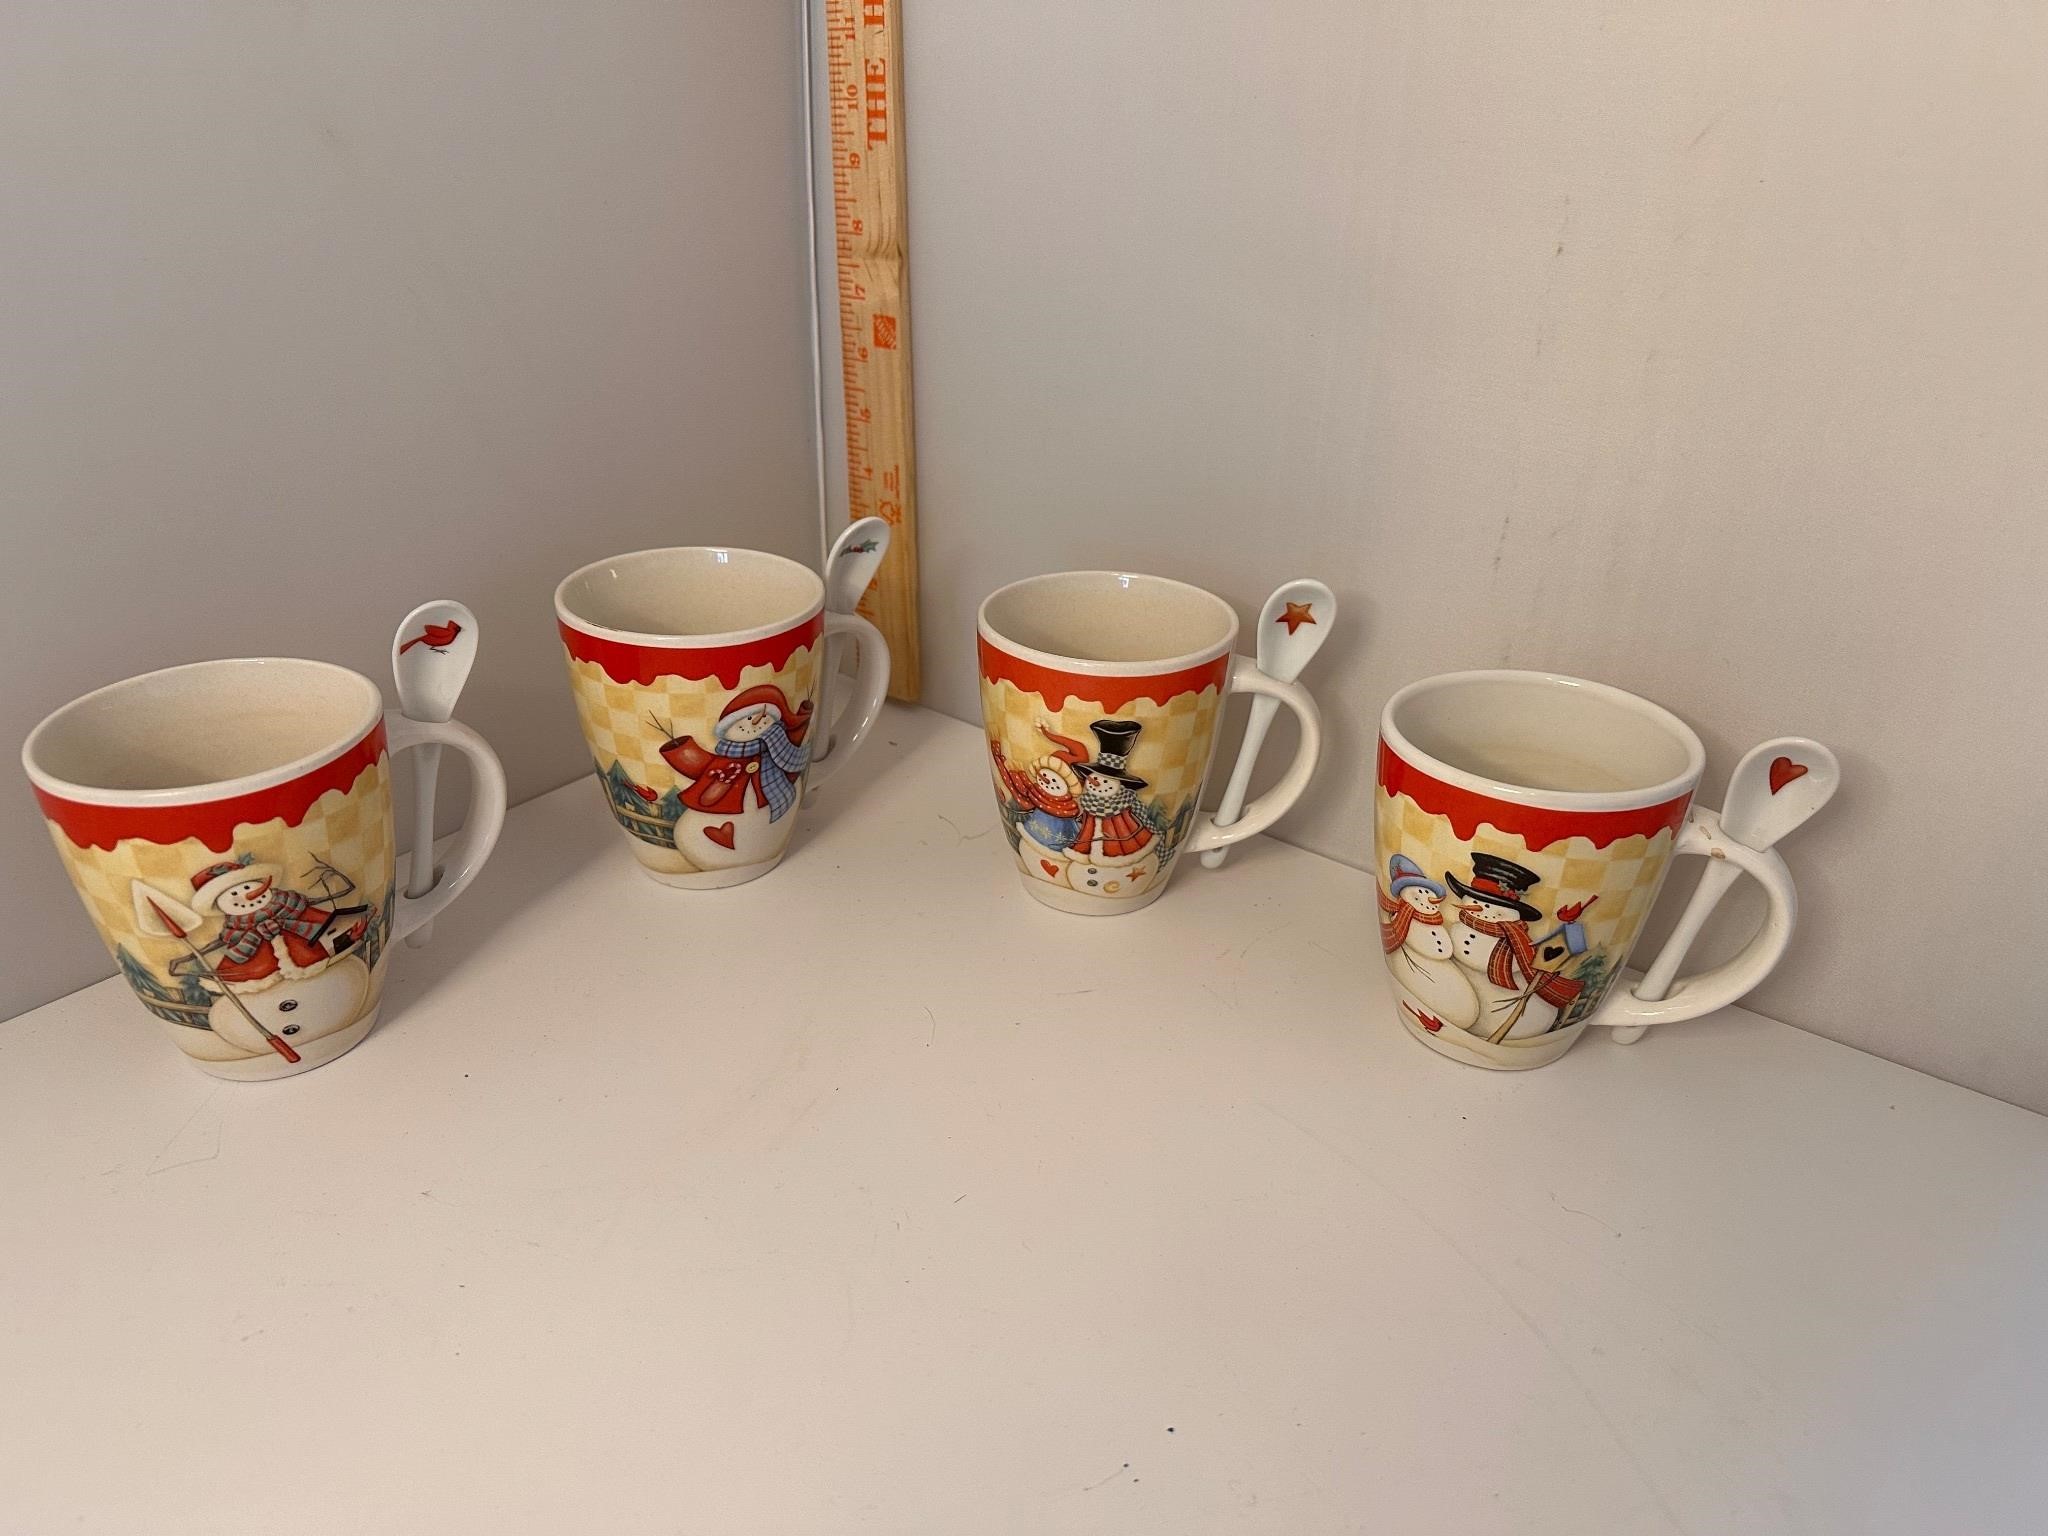 Set of 4 Snowman mugs with spoons